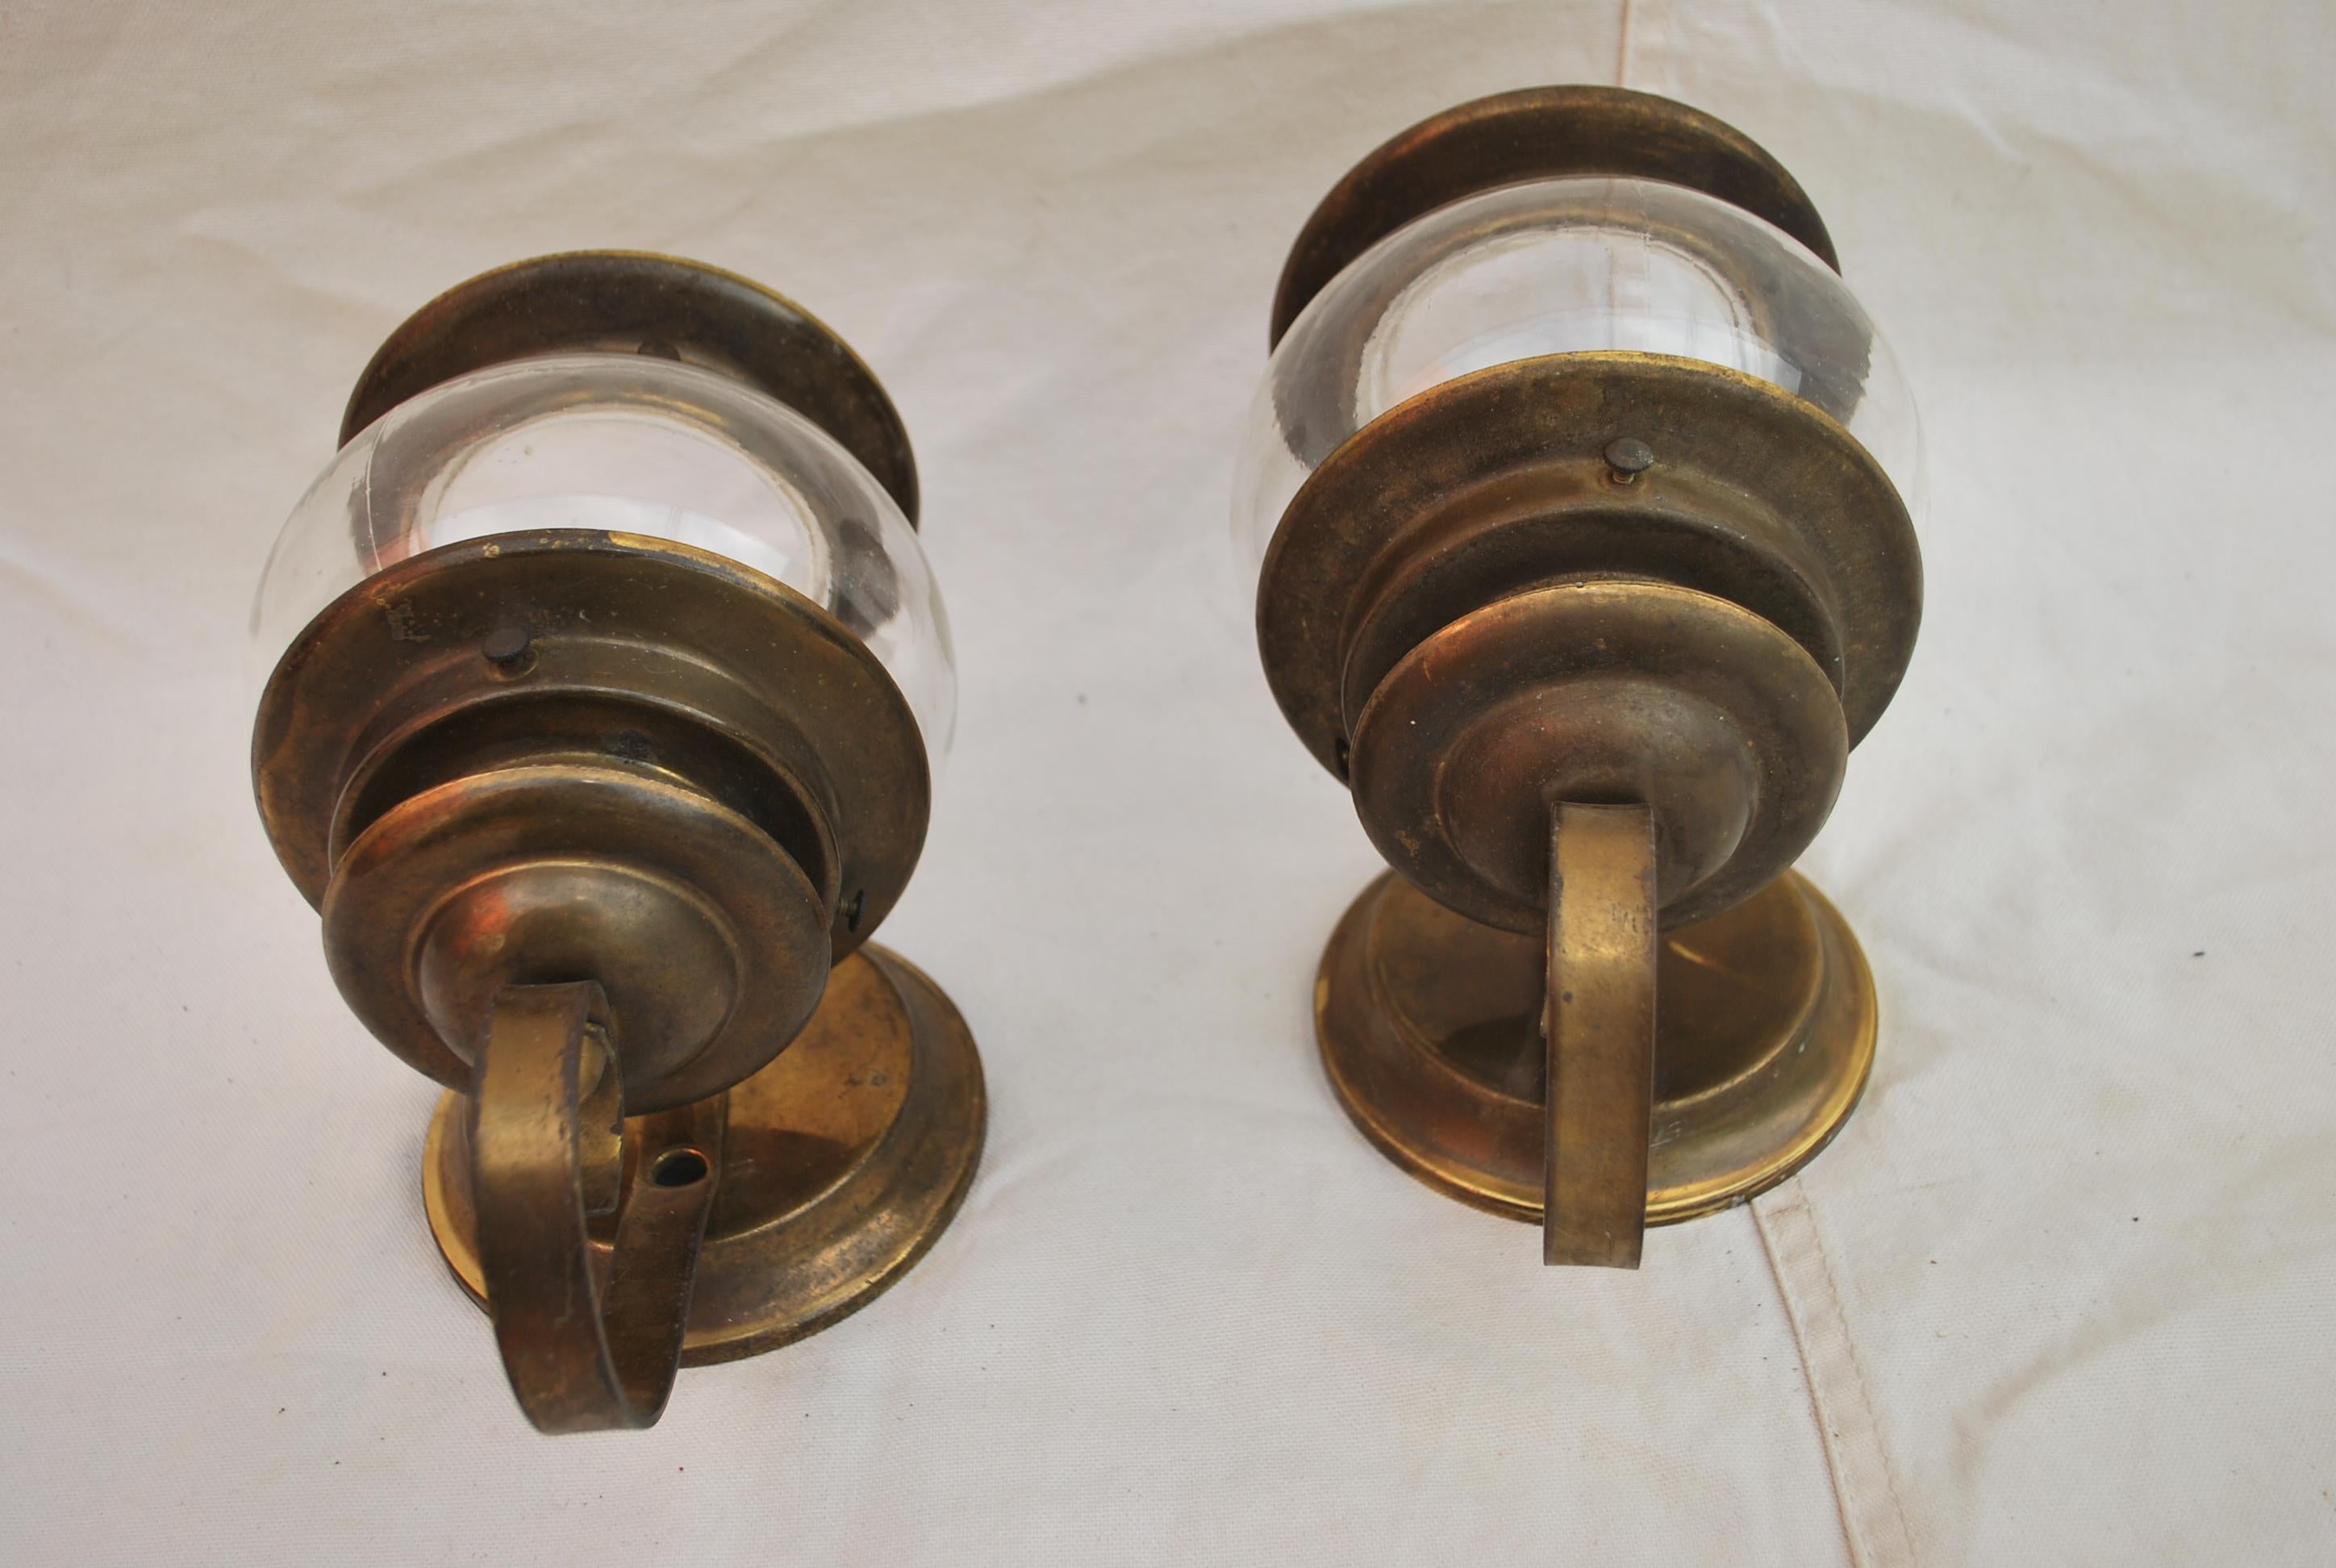 A cute little pair of 1930s brass outdoor sconces, or indoor as well, I could see these in a small bungalow style house or beach house.